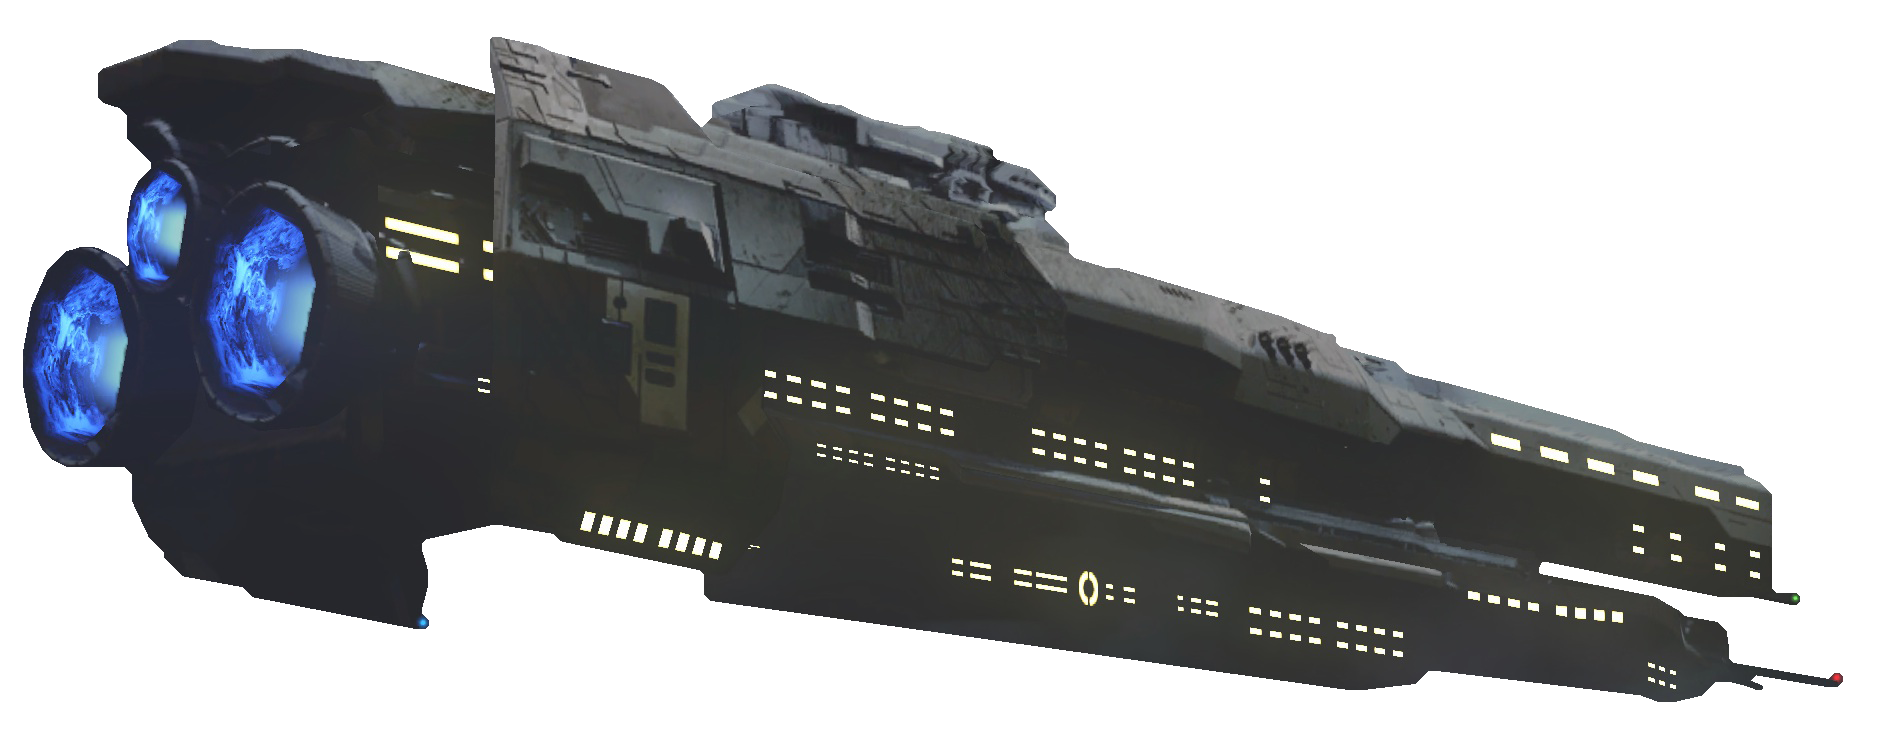 https://static.wikia.nocookie.net/halo/images/e/e6/Strident_frigate.png/revision/latest?cb=20130413030529